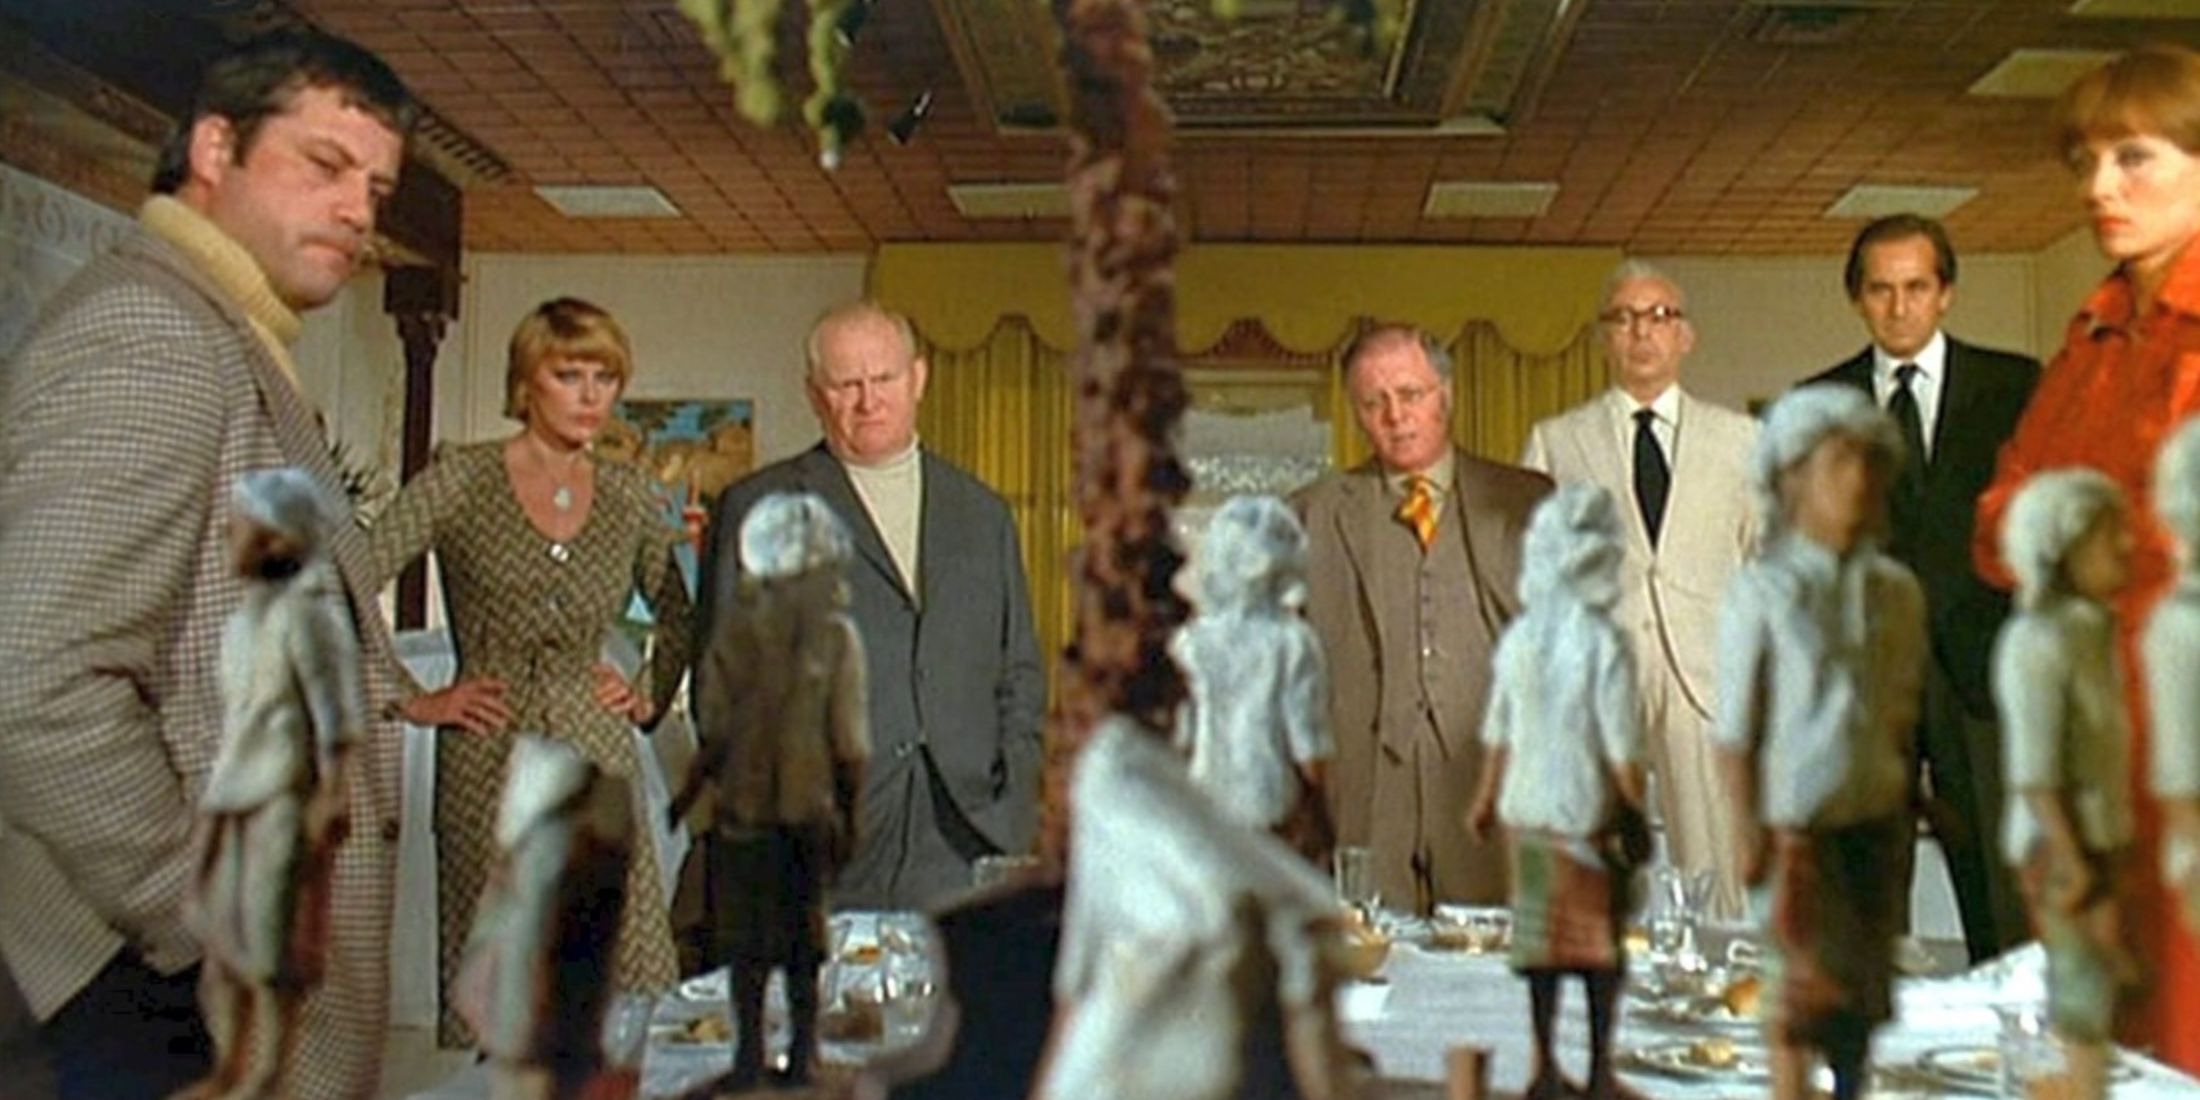 The guests eye the statues in Ten Little Indians